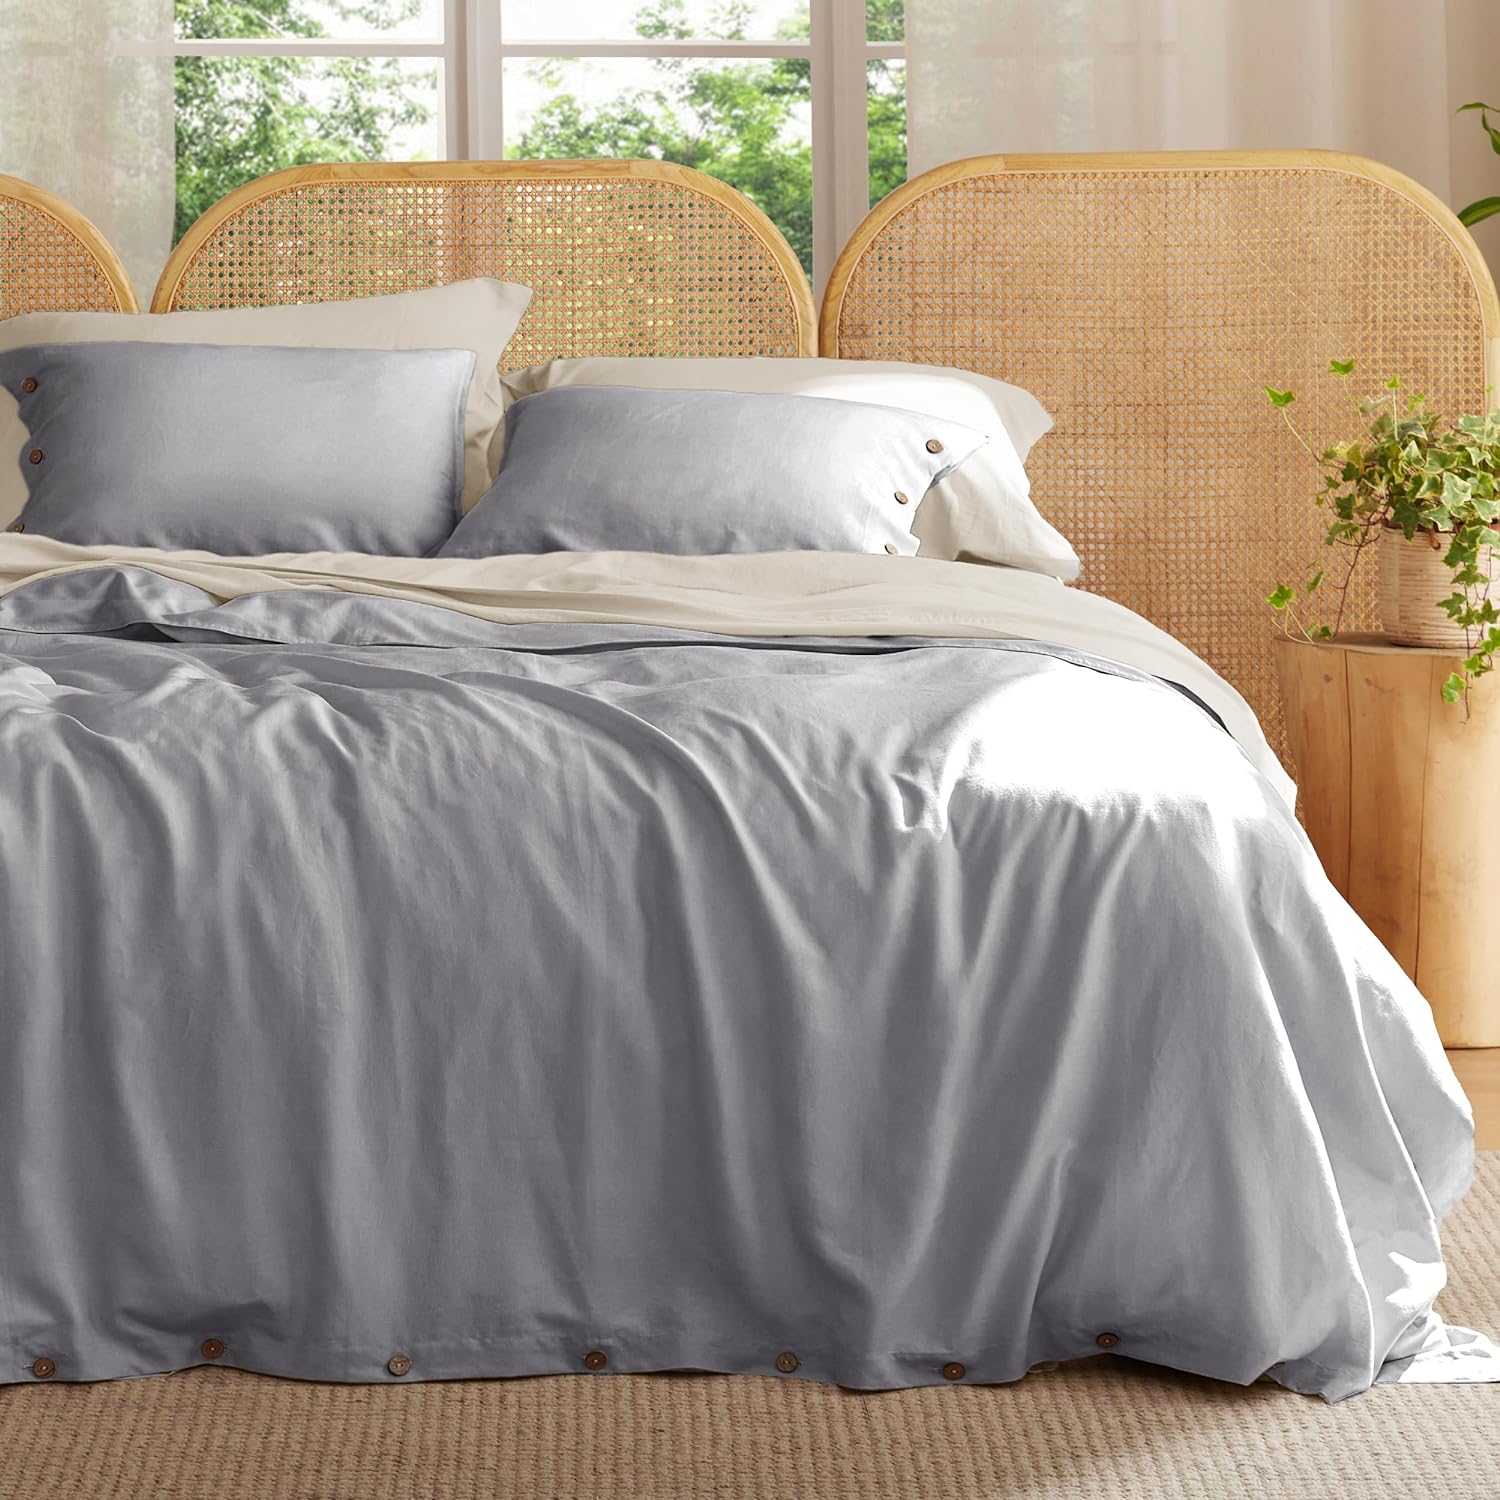 Rayon Derived from Bamboo and Linen Duvet Cover Set